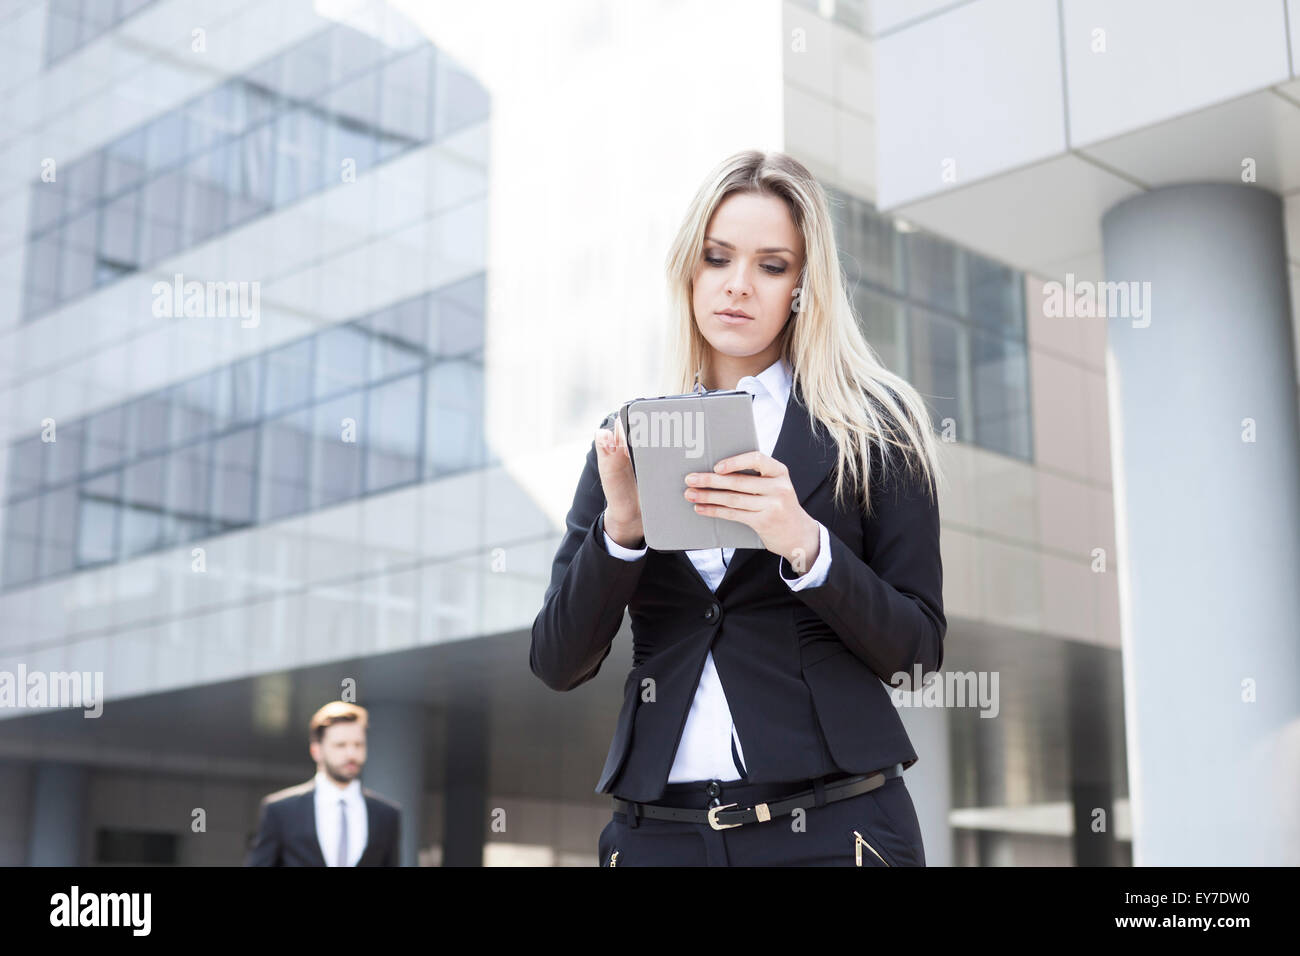 Business Woman using digital tablet outdoors Banque D'Images